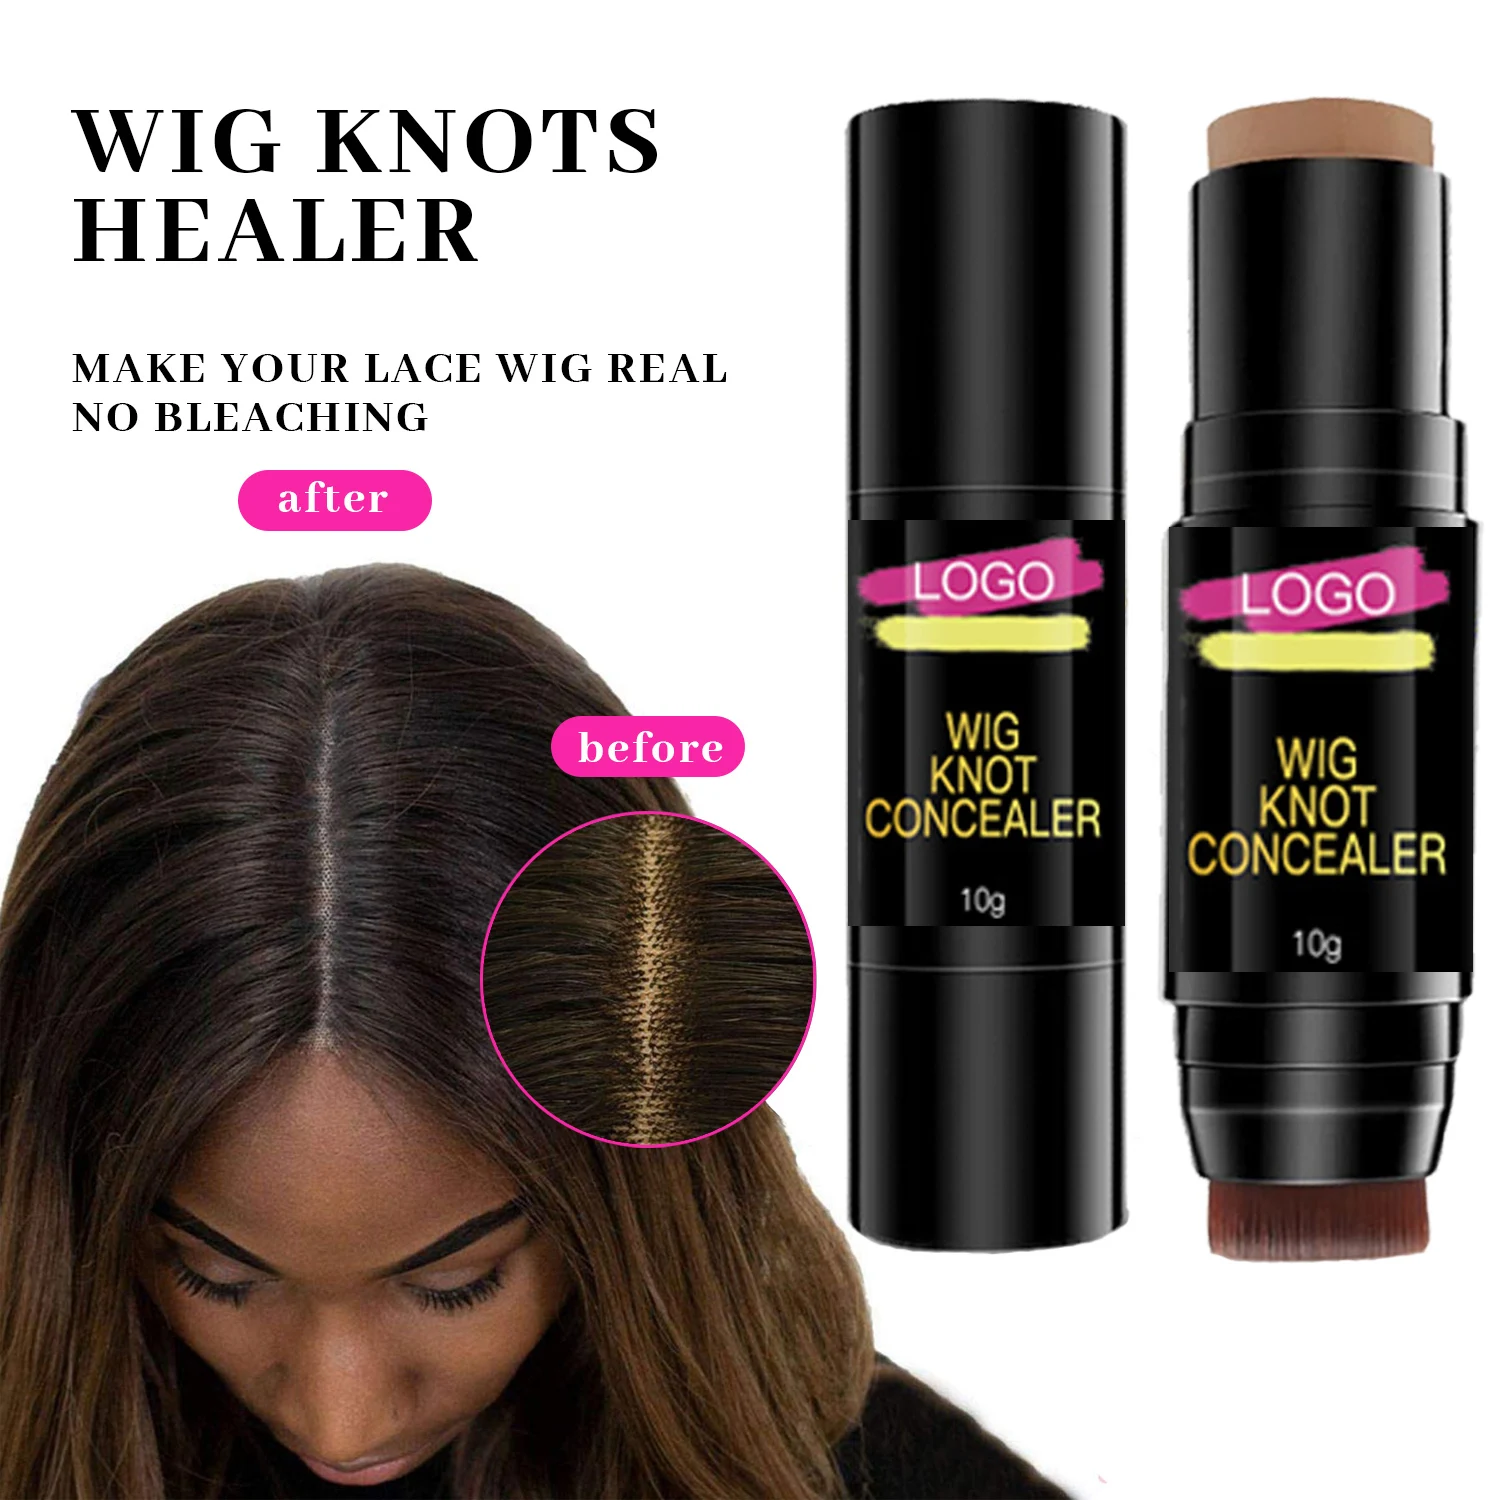 Wig Knots Healer Portable Lace Tint Stick for Wigs Wig Knot Concealer with Brush Lace Dyeing Stick 4 Colors Private Label